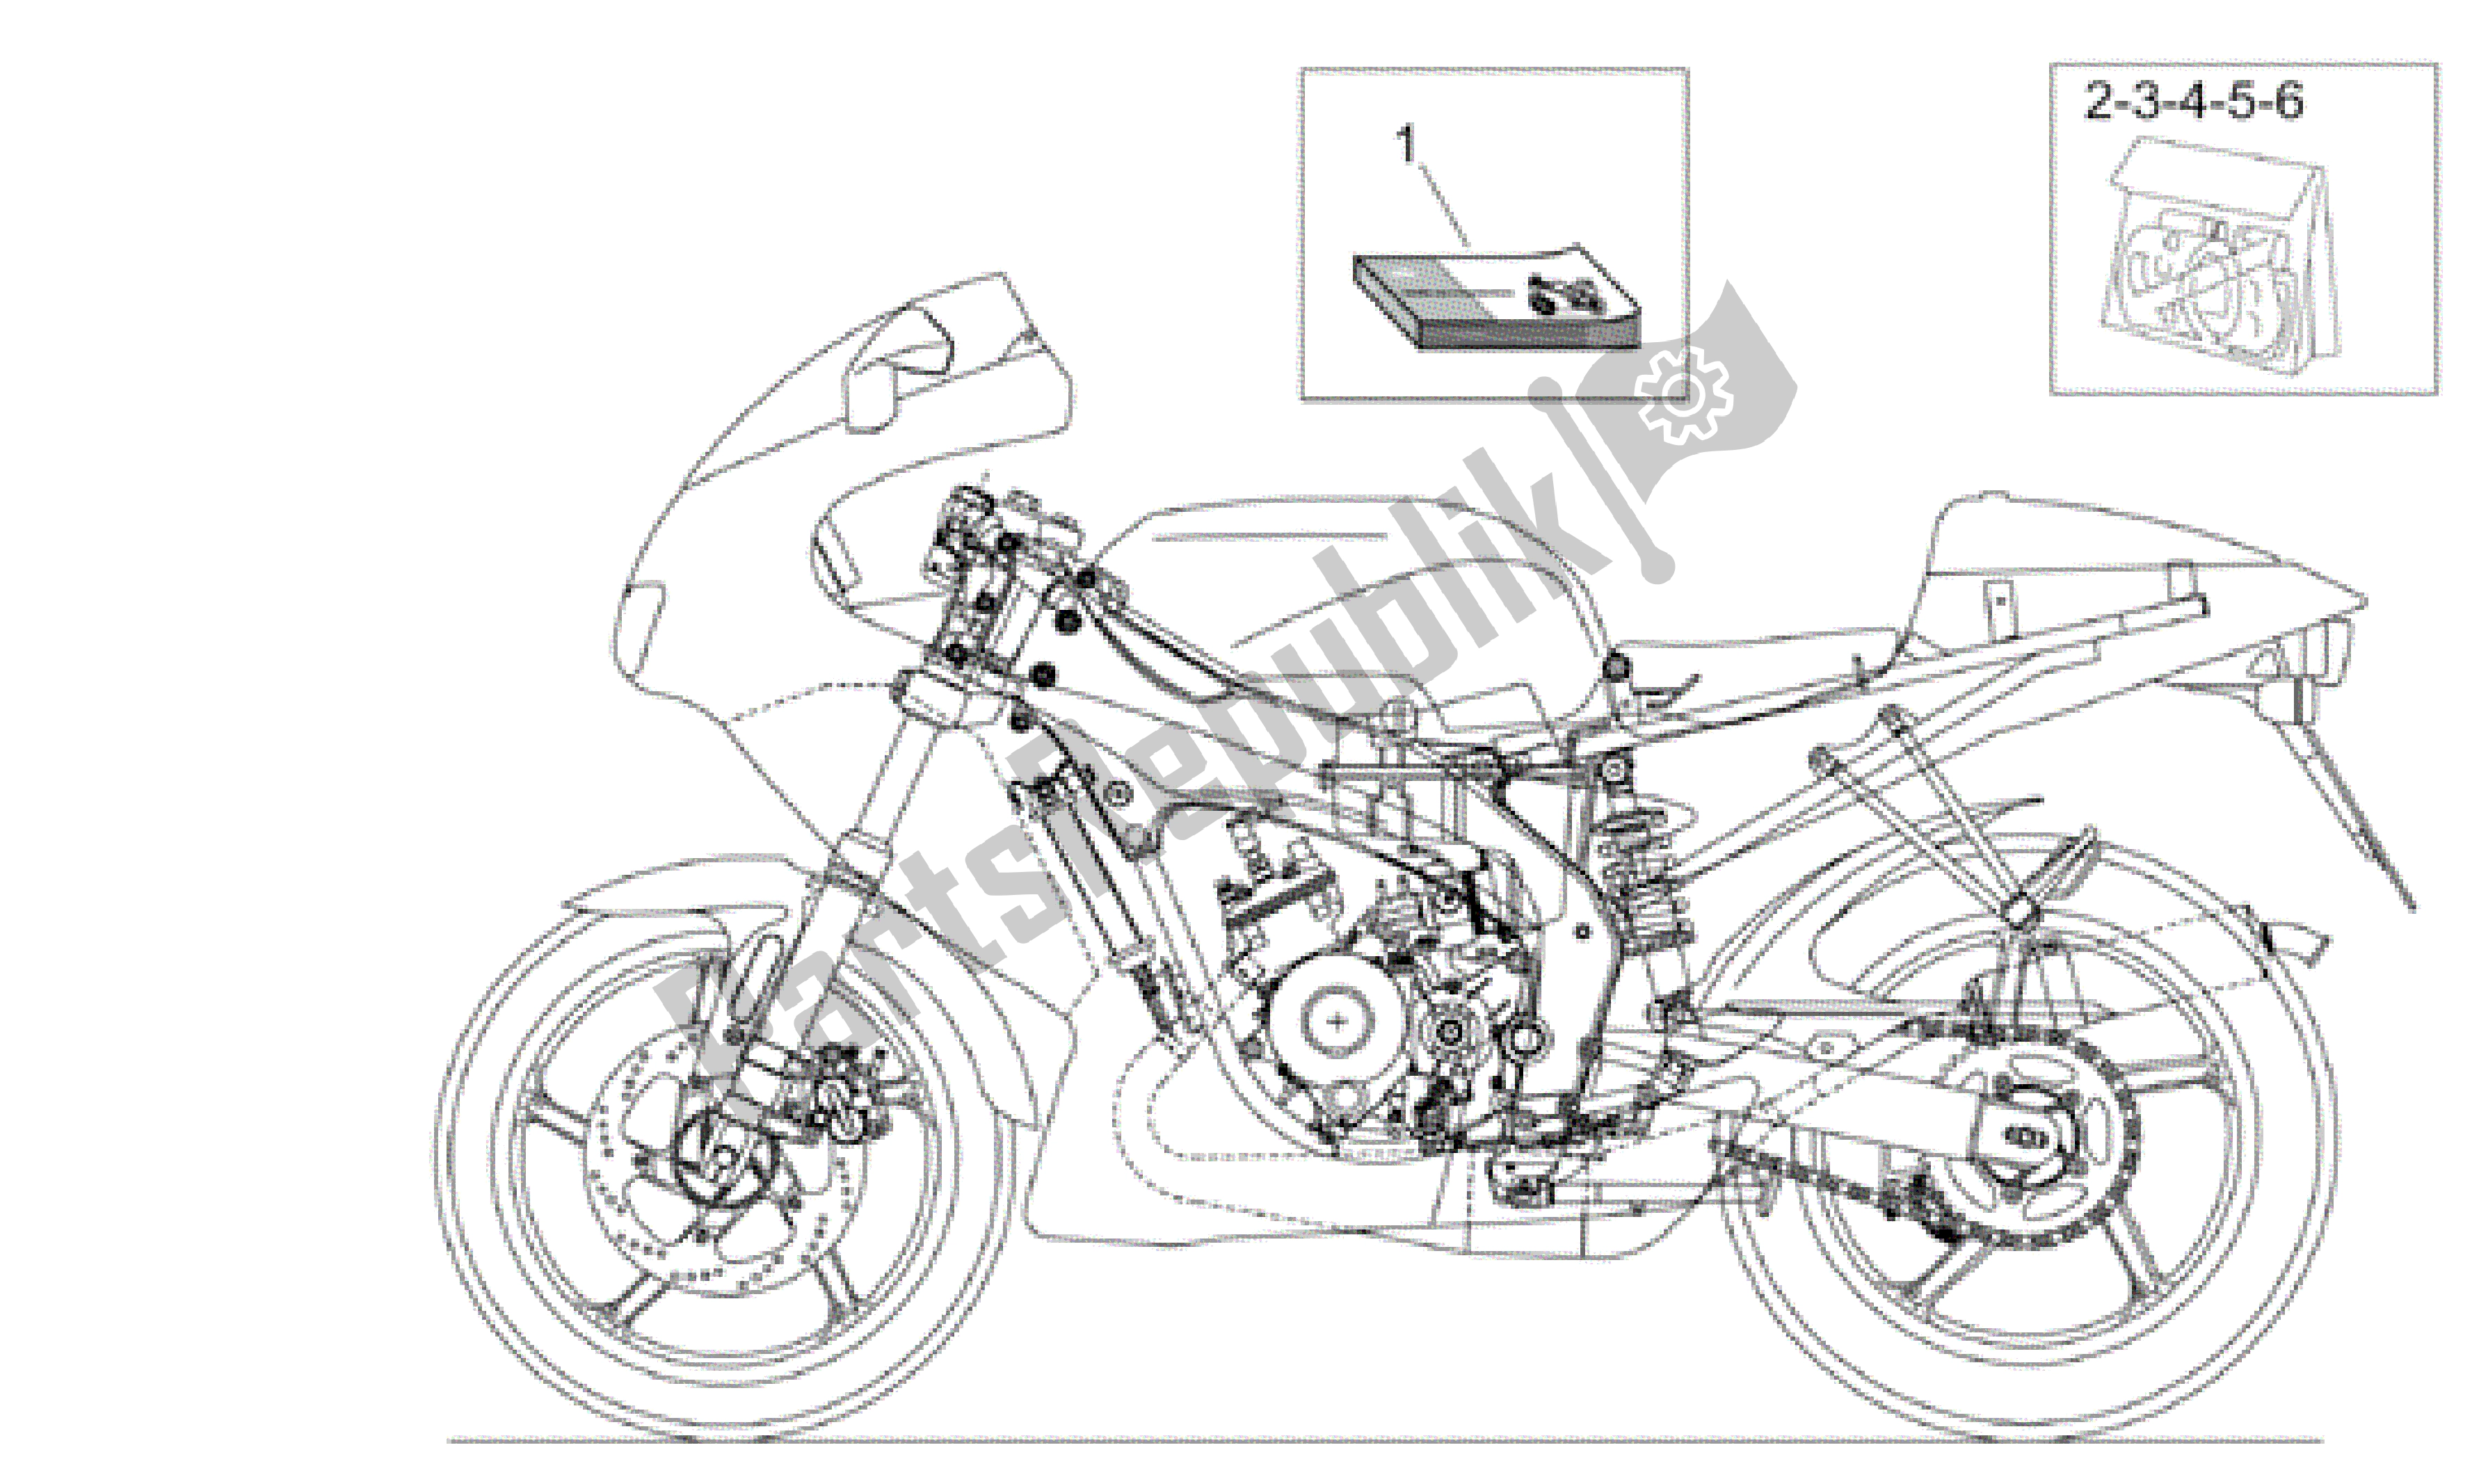 All parts for the Op.'s Handbooks And Decal of the Aprilia RS 50 1999 - 2005